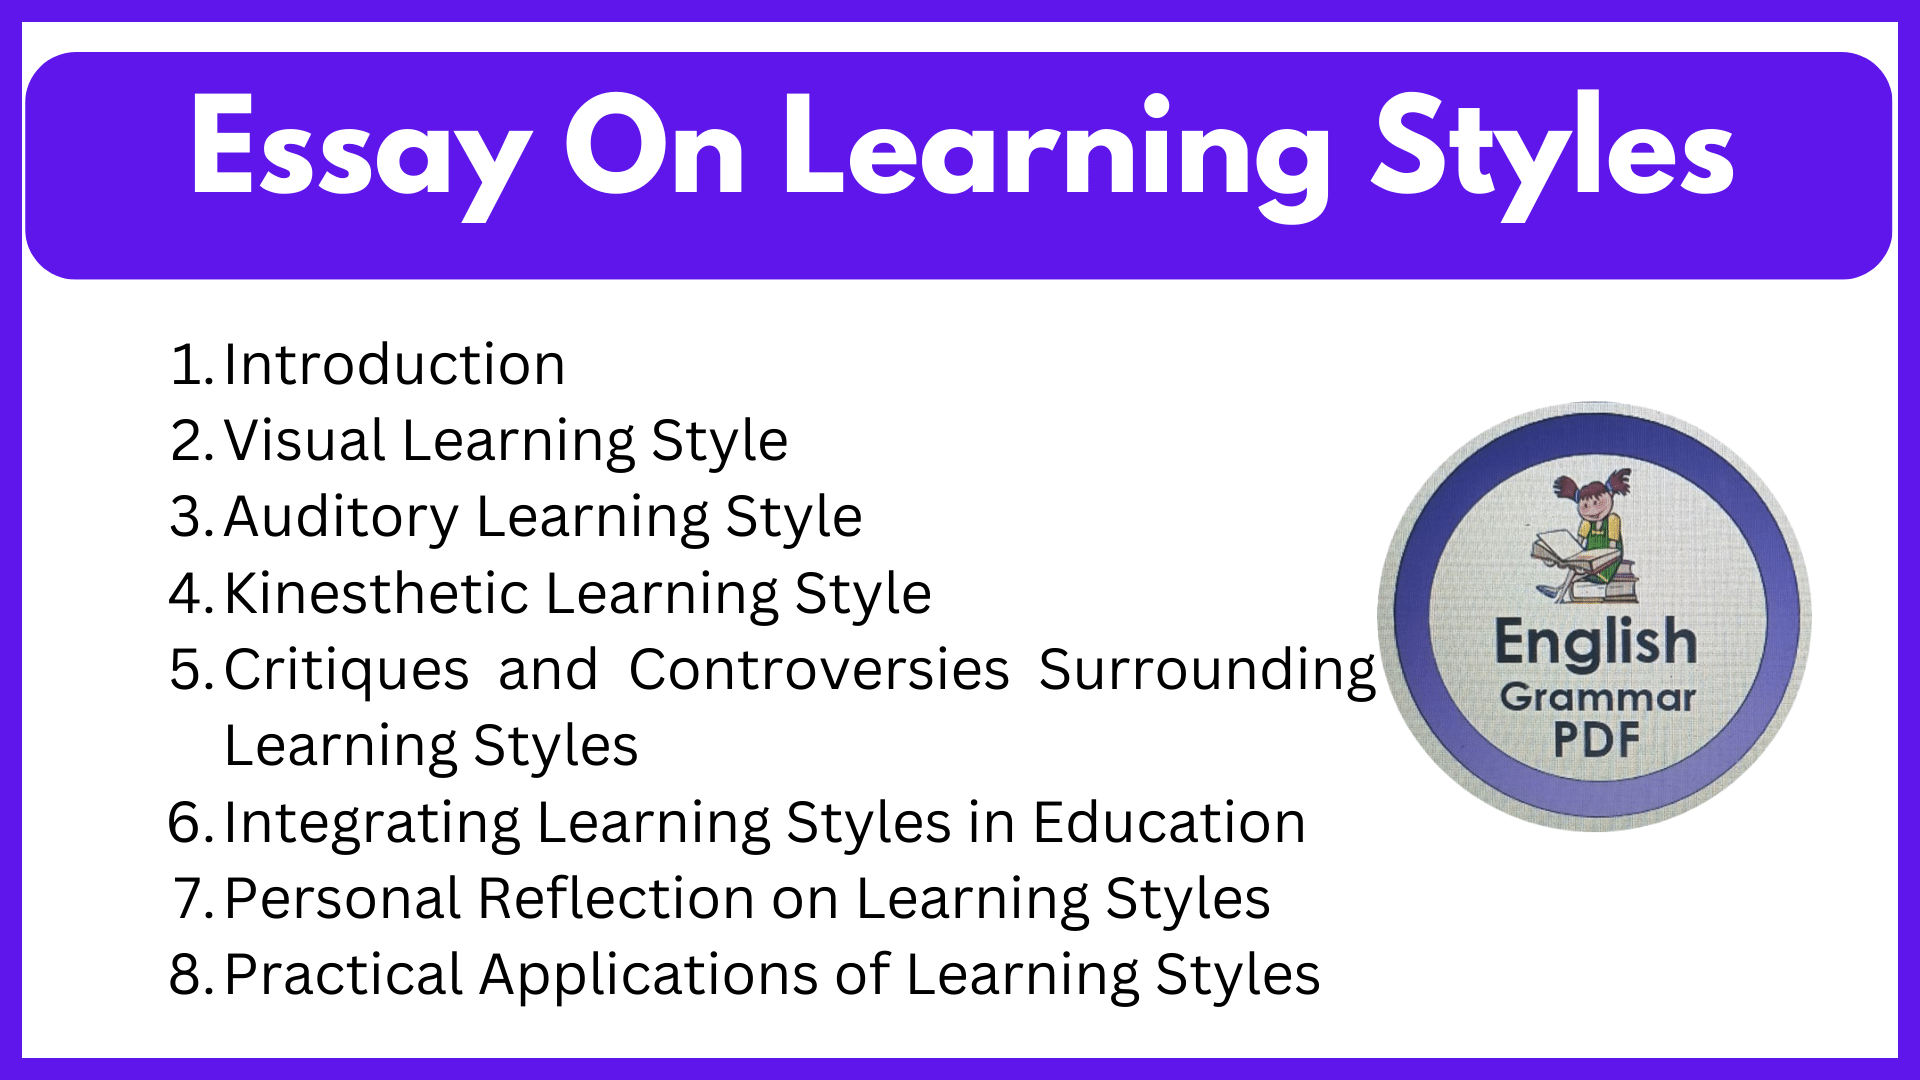 Essay On Learning Styles